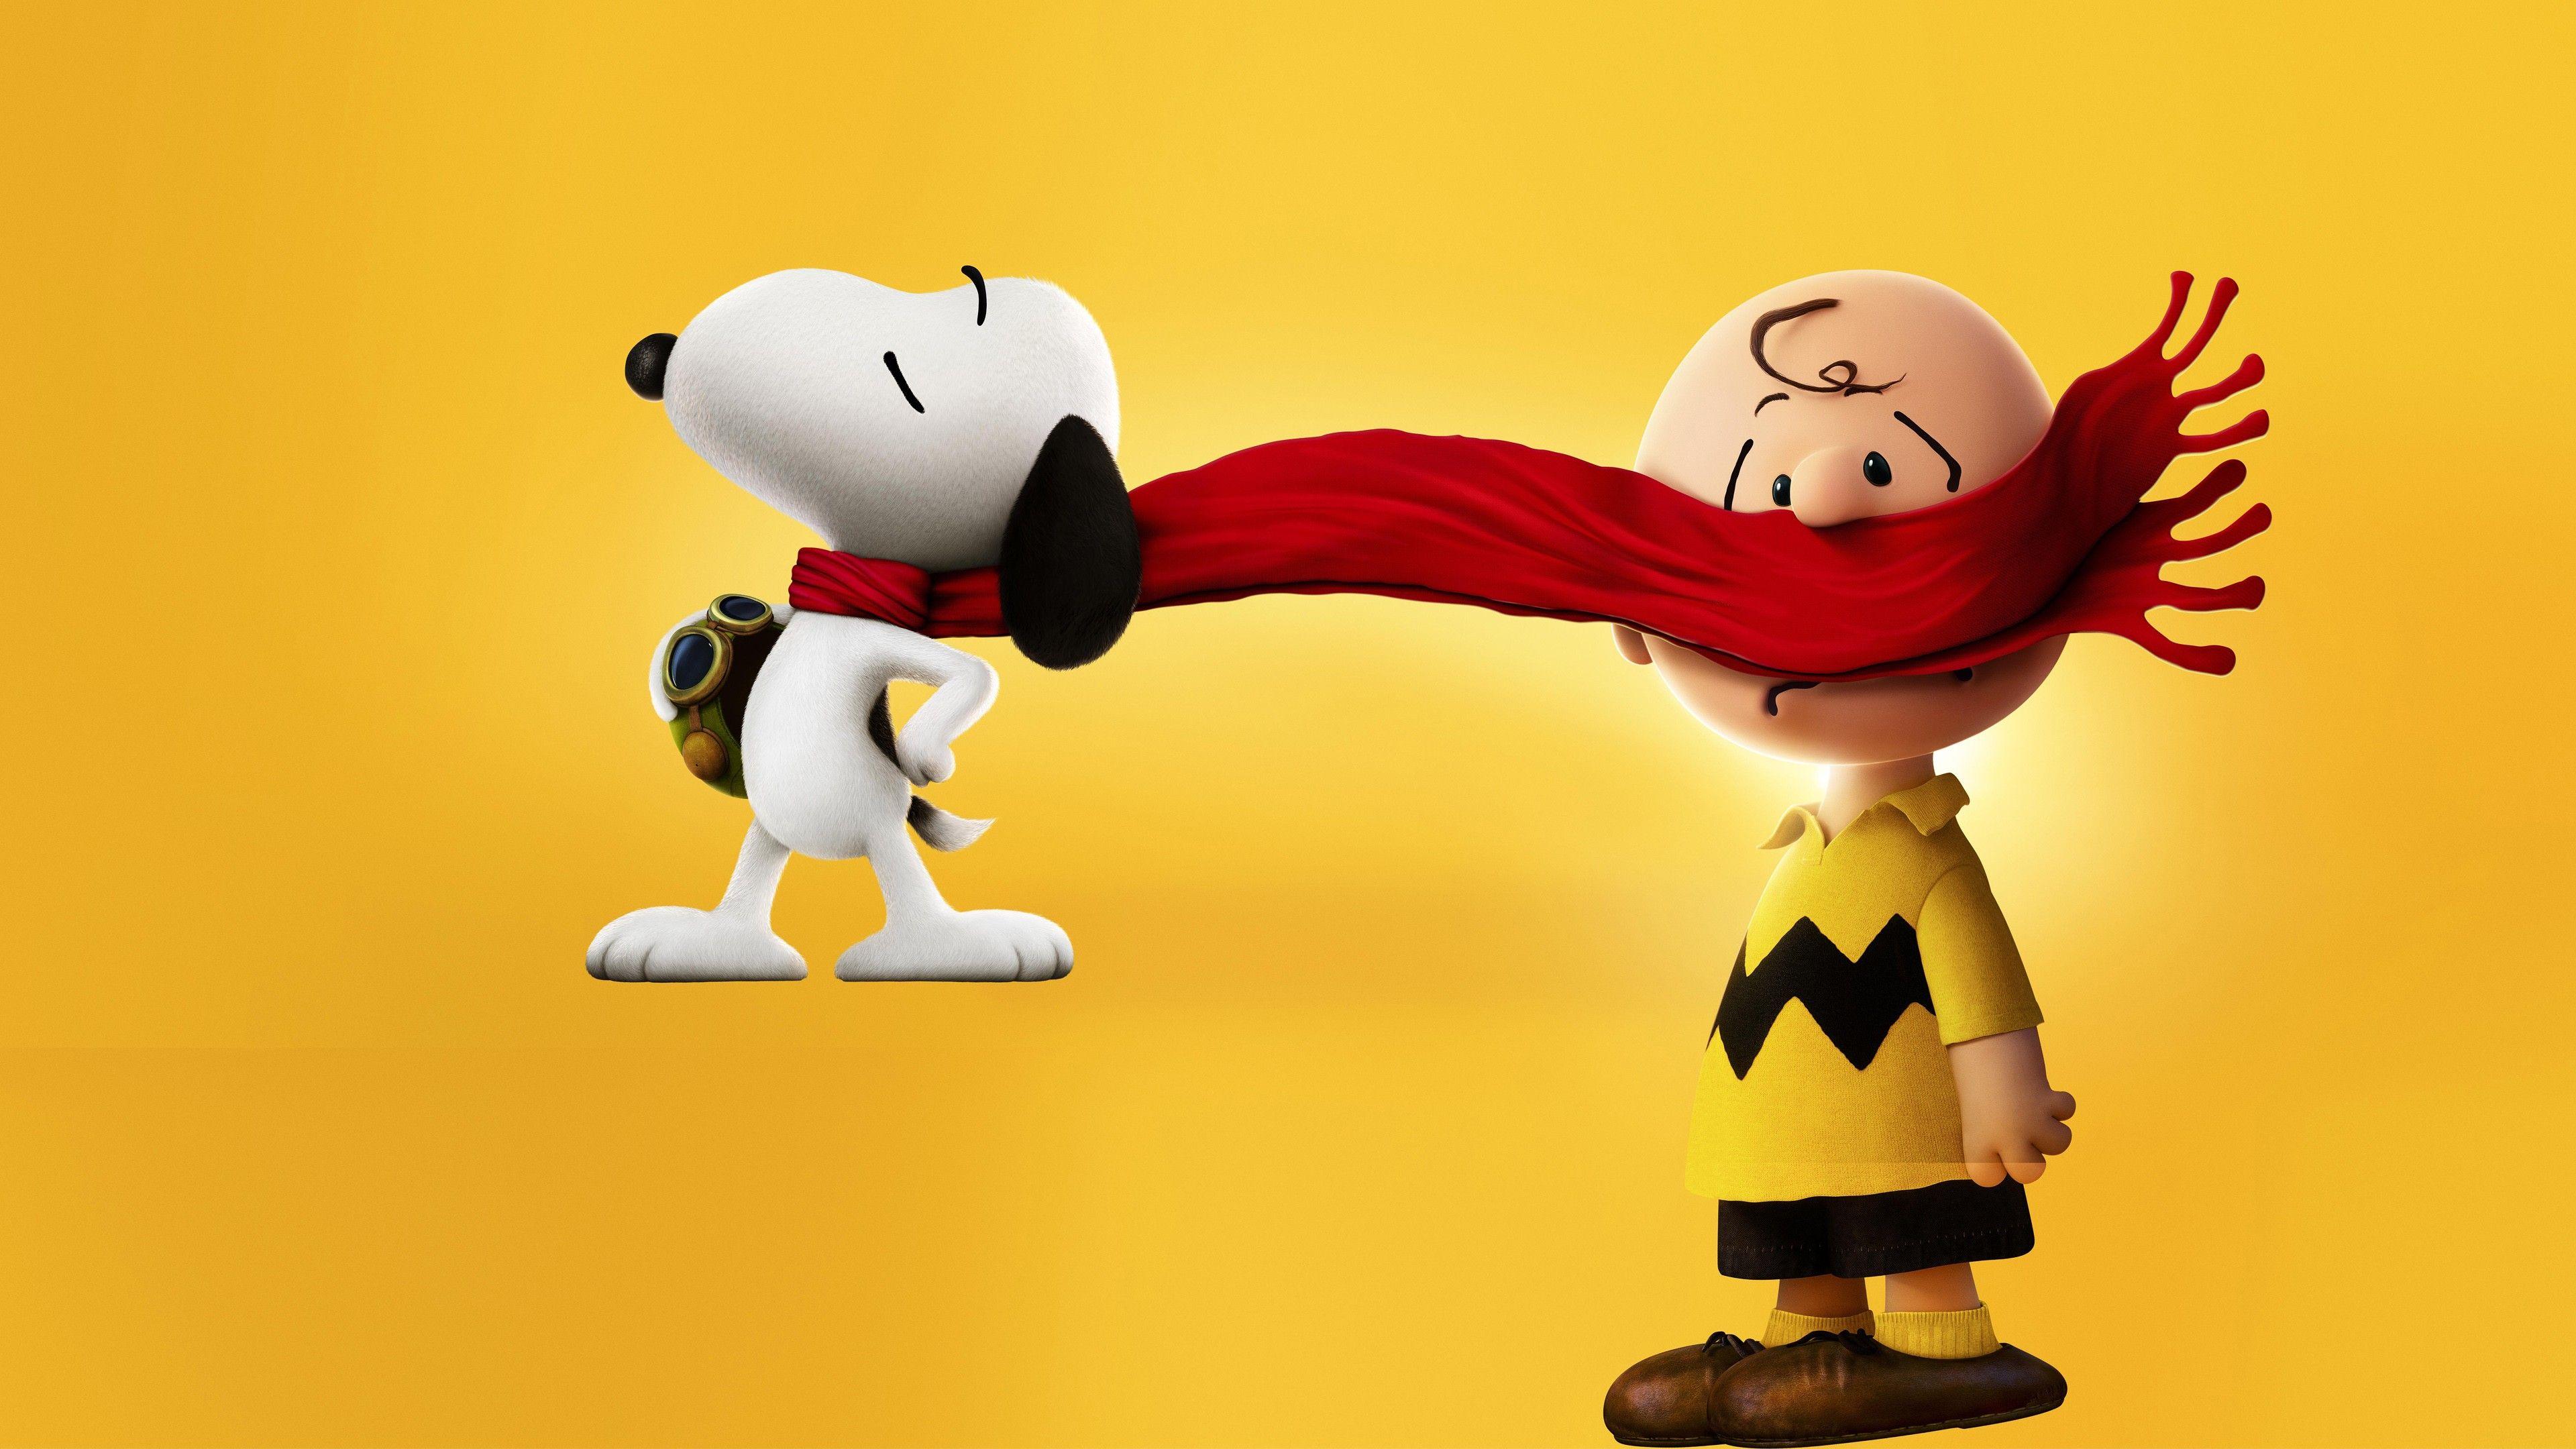 Peanuts Wallpapers Top Free Peanuts Backgrounds Wallpaperaccess Images, Photos, Reviews